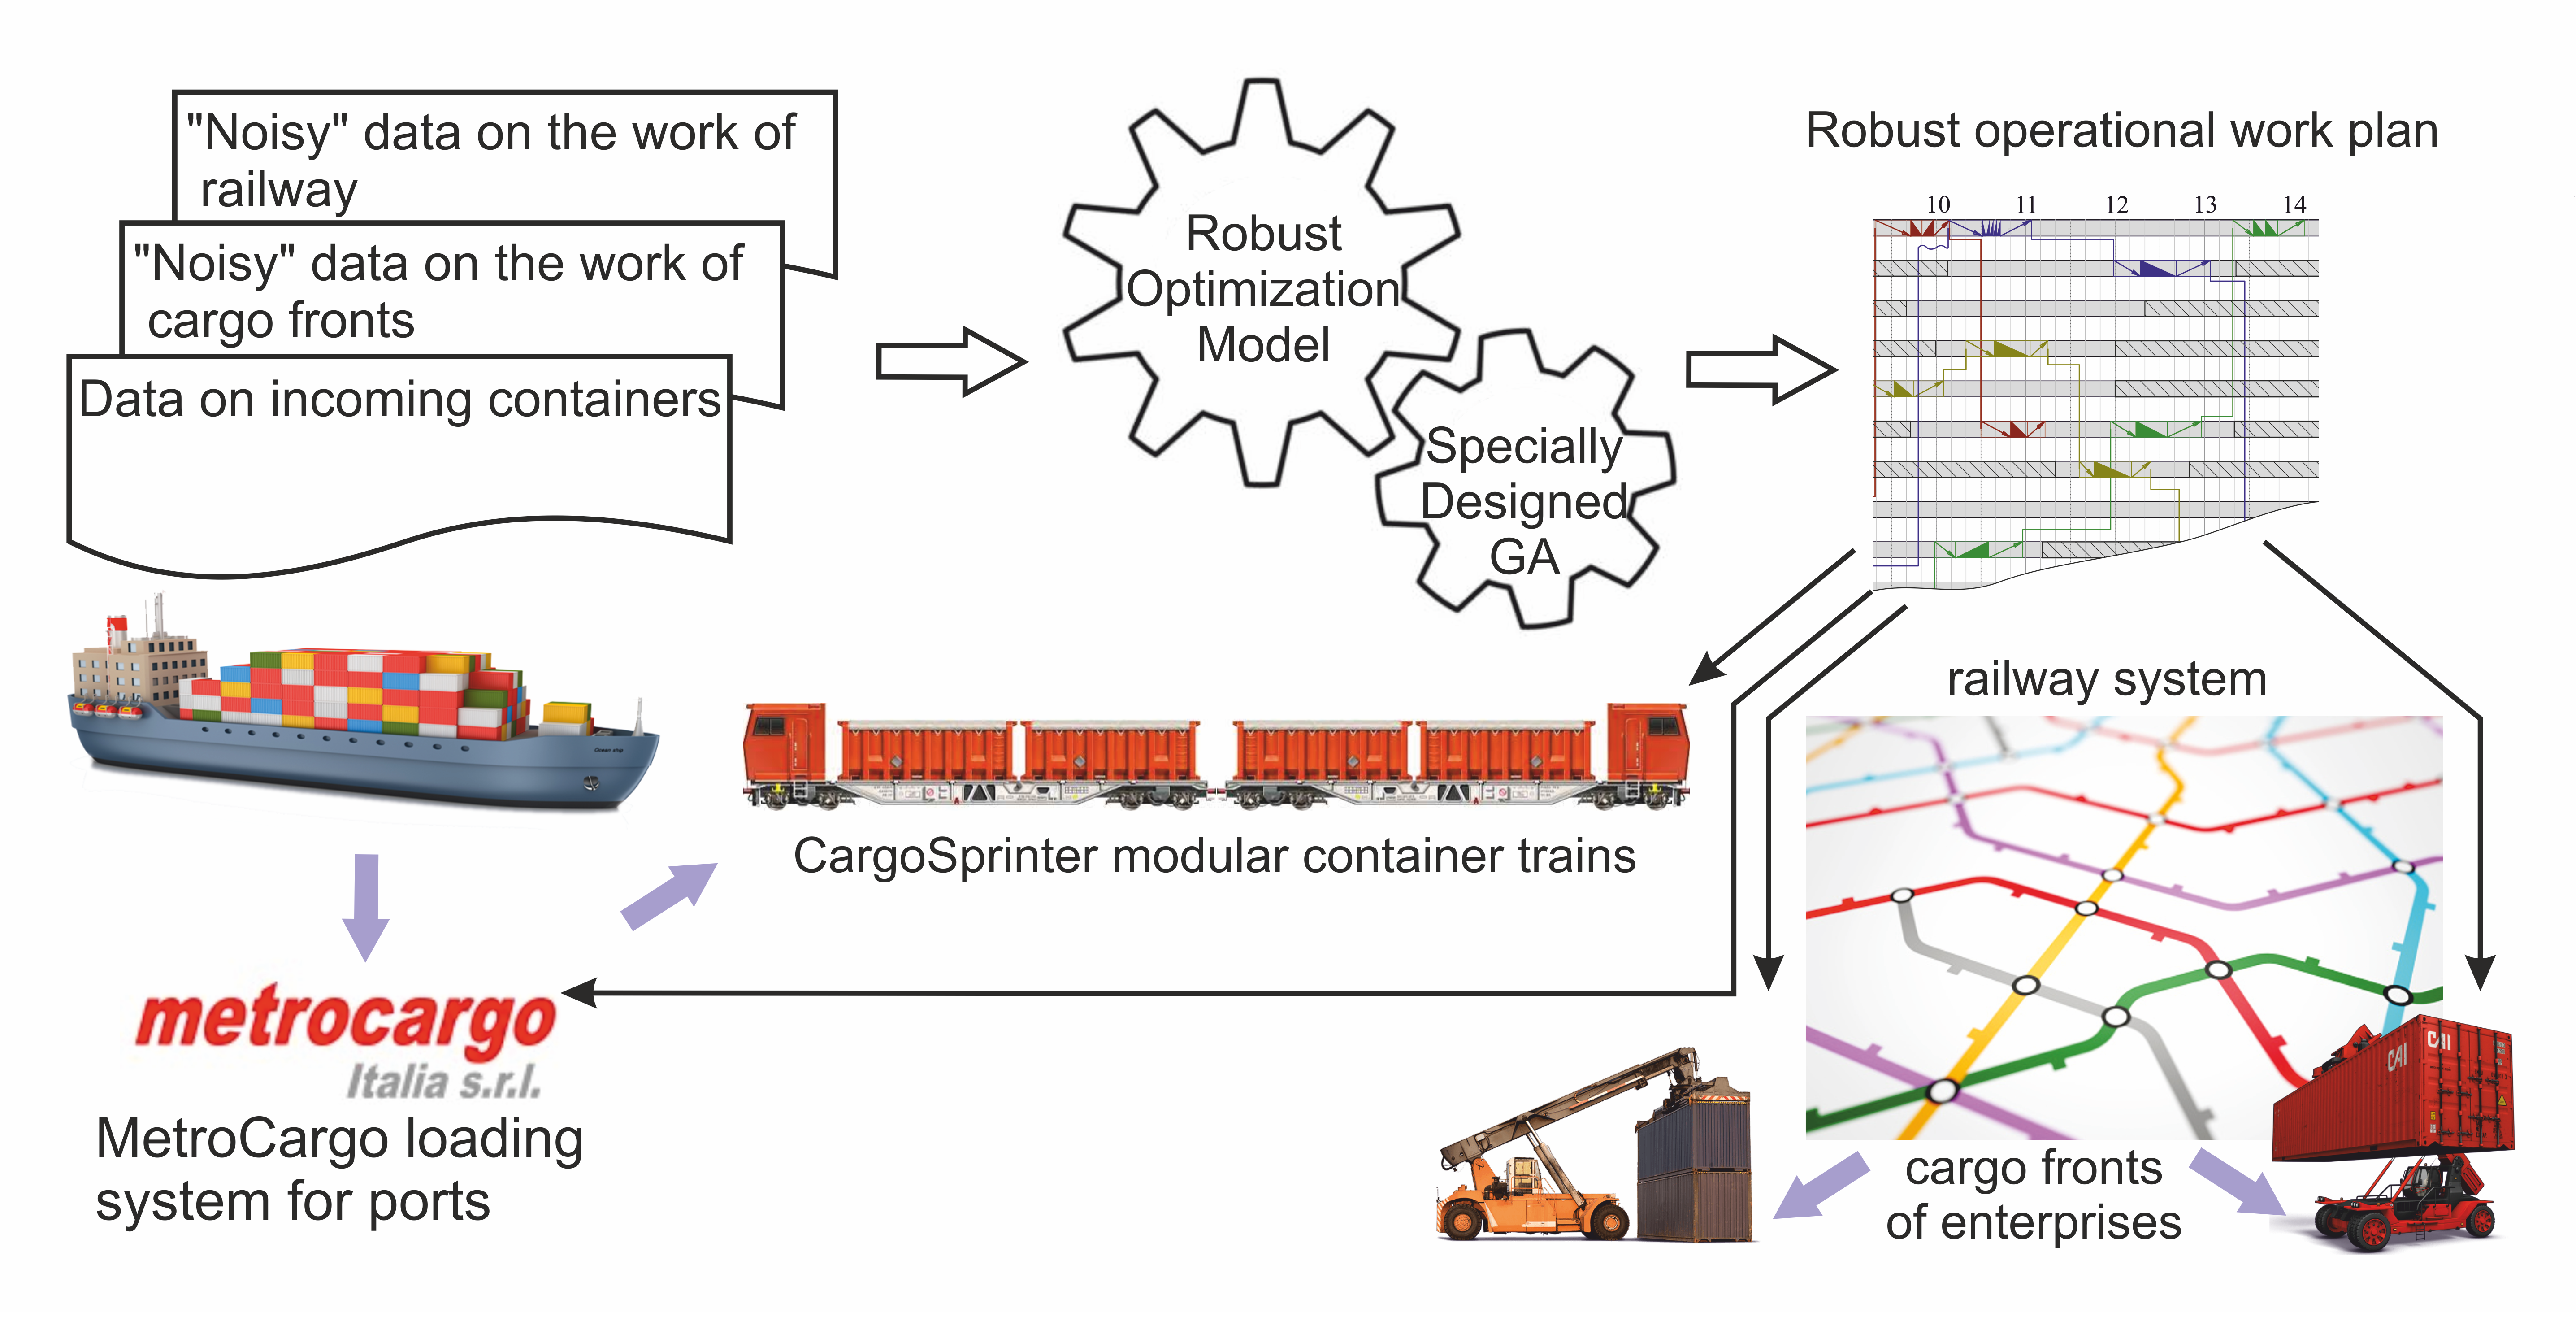 Building a model for planning rapid delivery of containers by rail under the conditions of intermodal transportation based on robust optimization